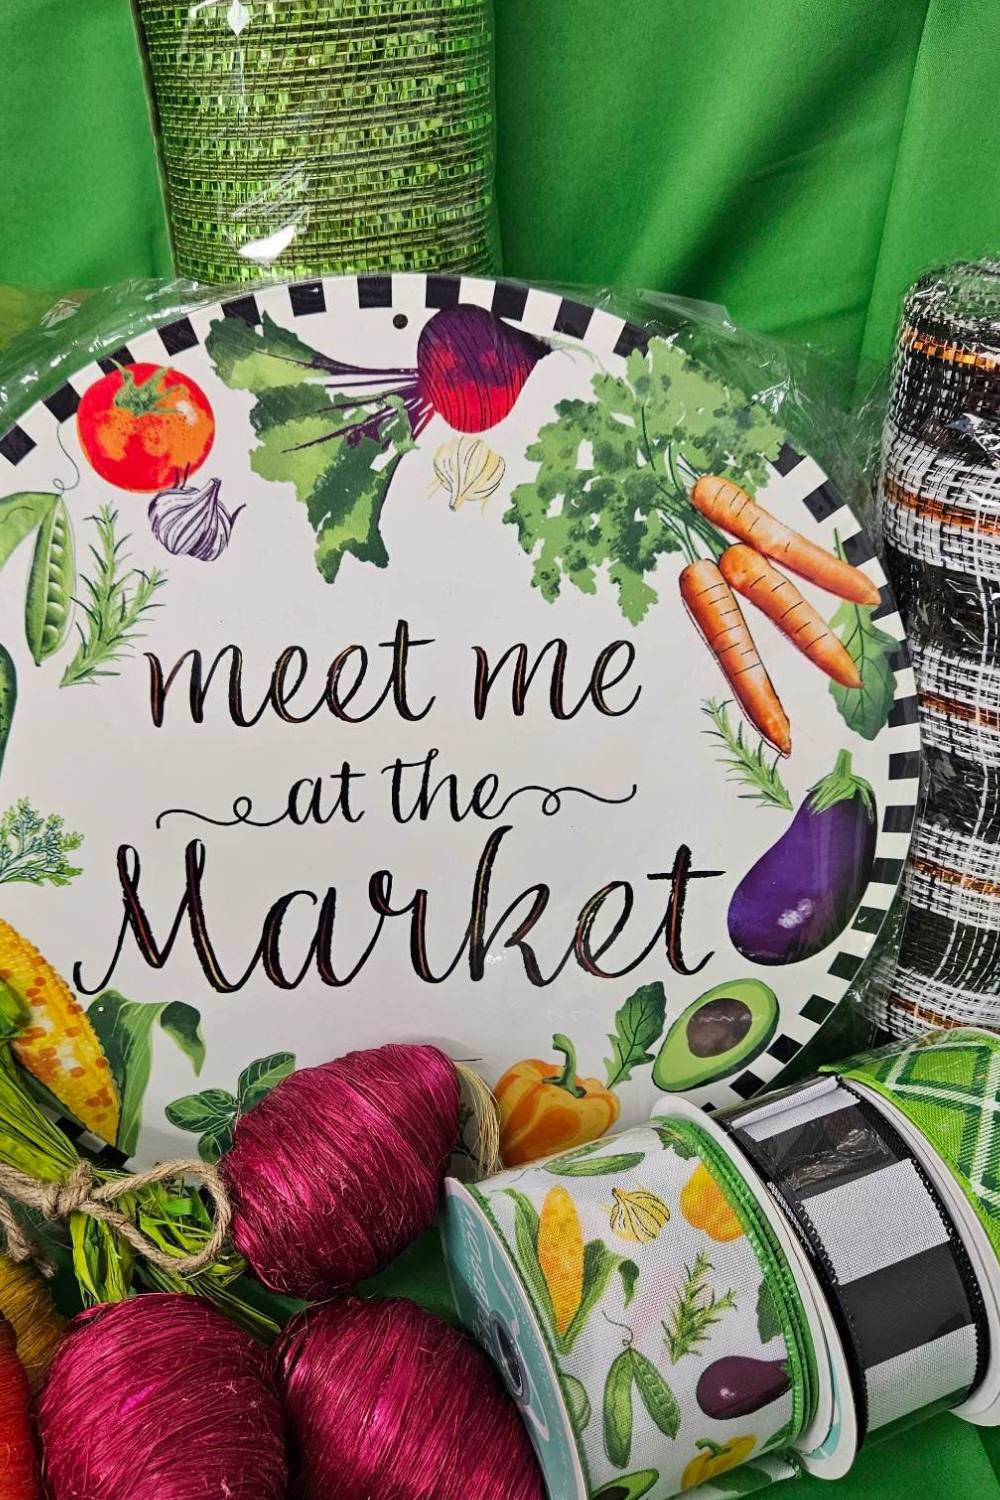 supplies for meet me at the market deco mesh wreath